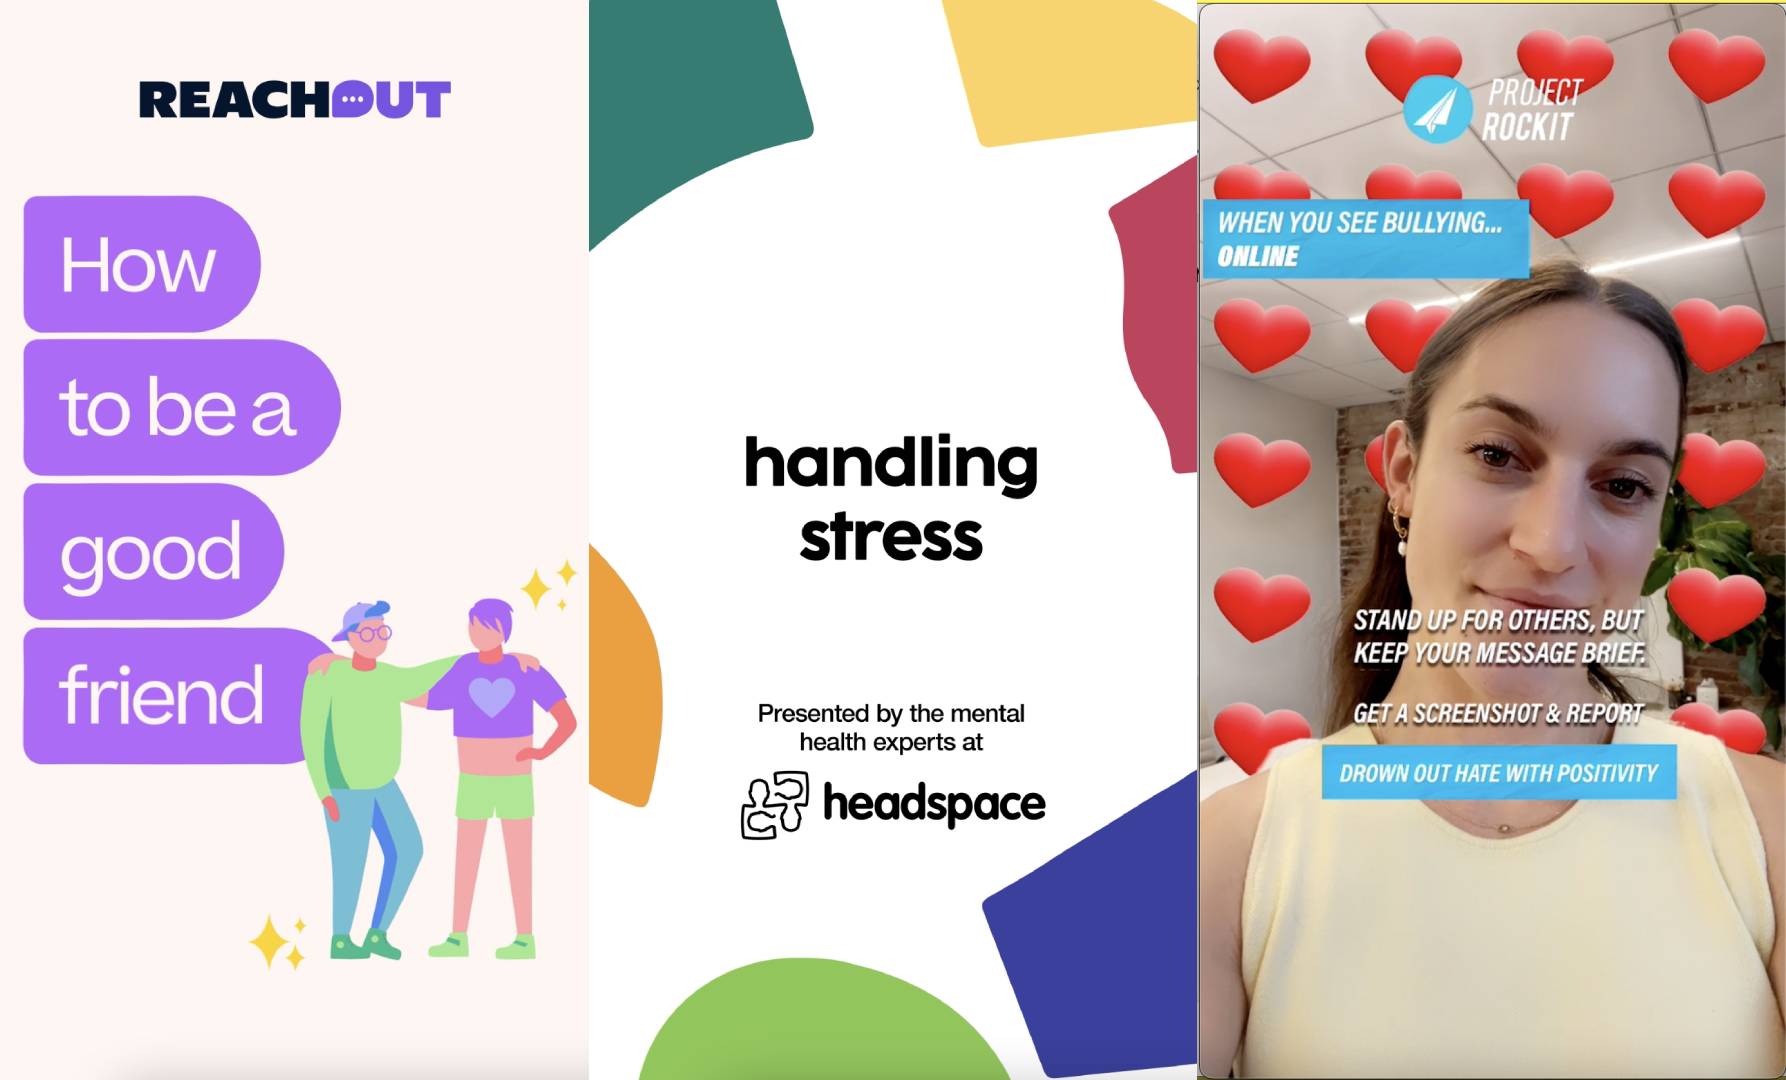 Snapchat Launches Anti Bullying Tools On World Mental Health Day Bandt